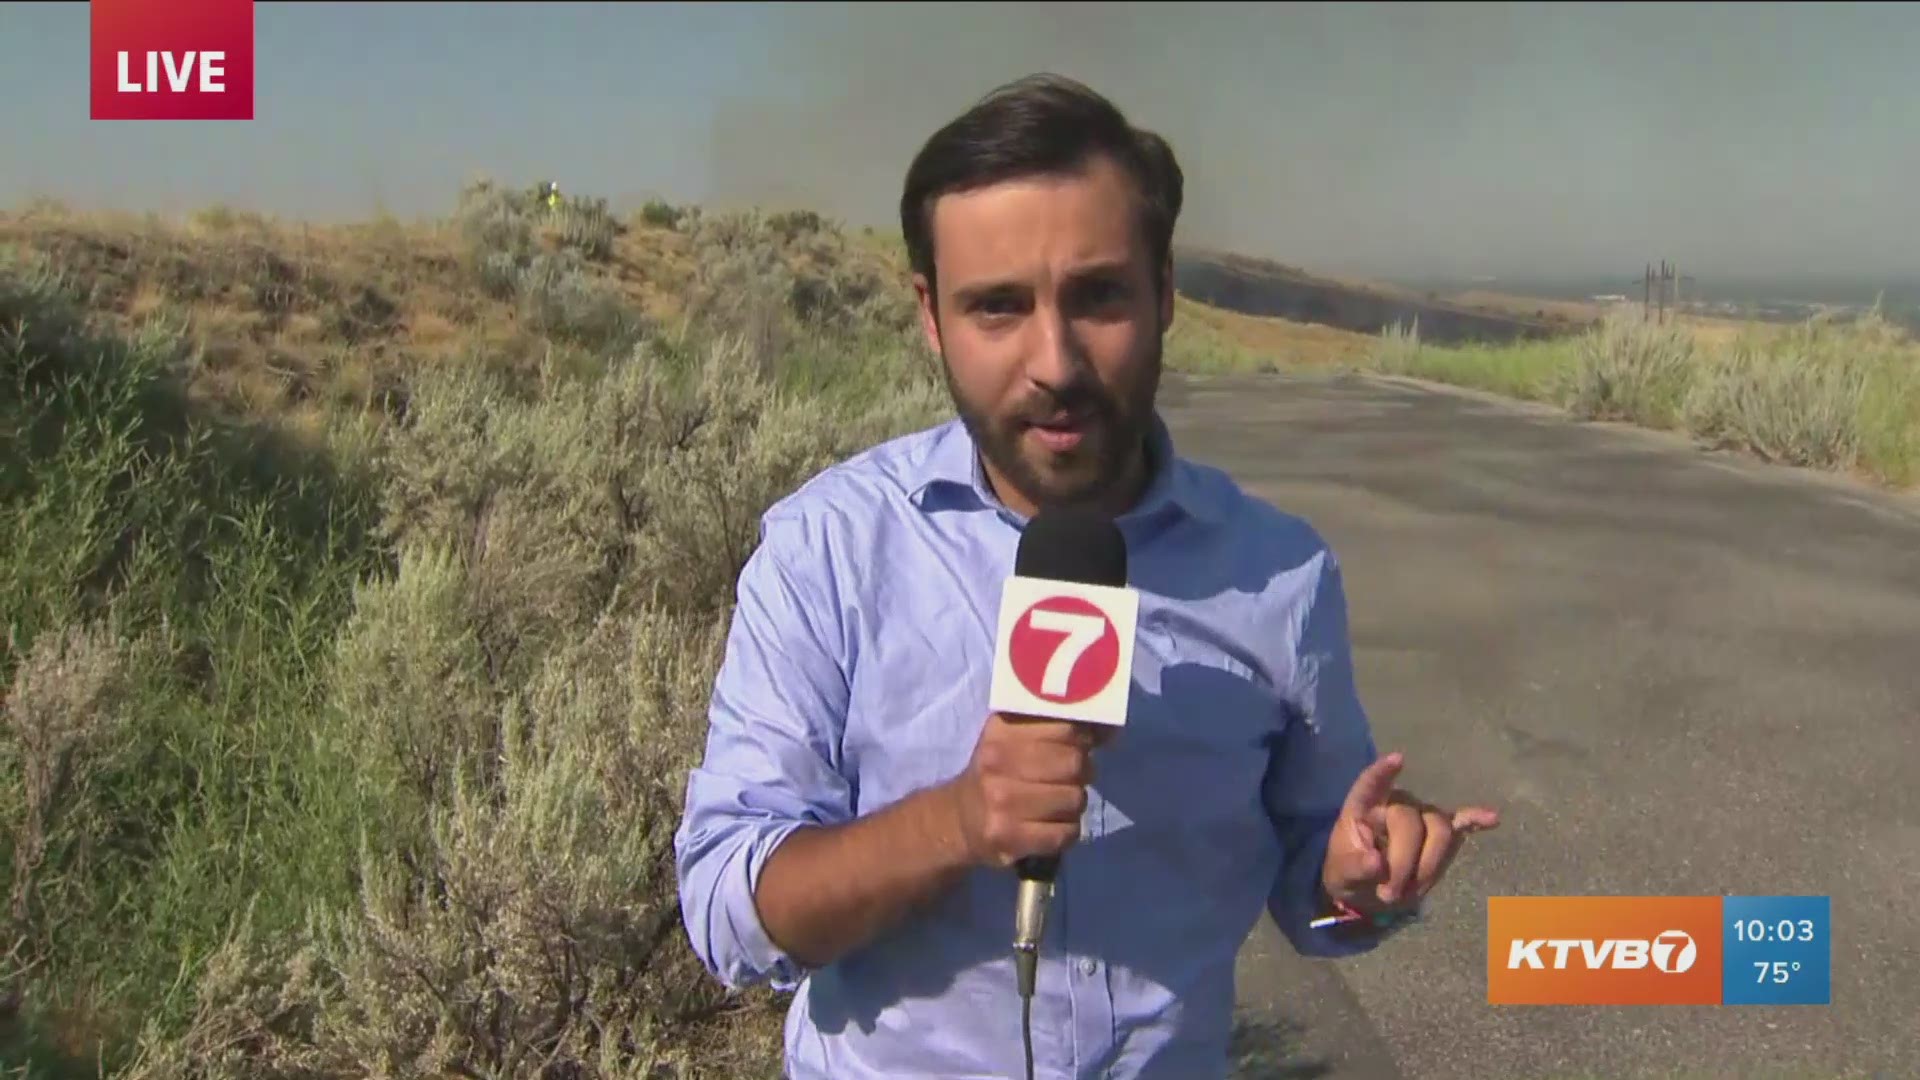 An update from Joe Parris on a grass fire burning in the foothills.